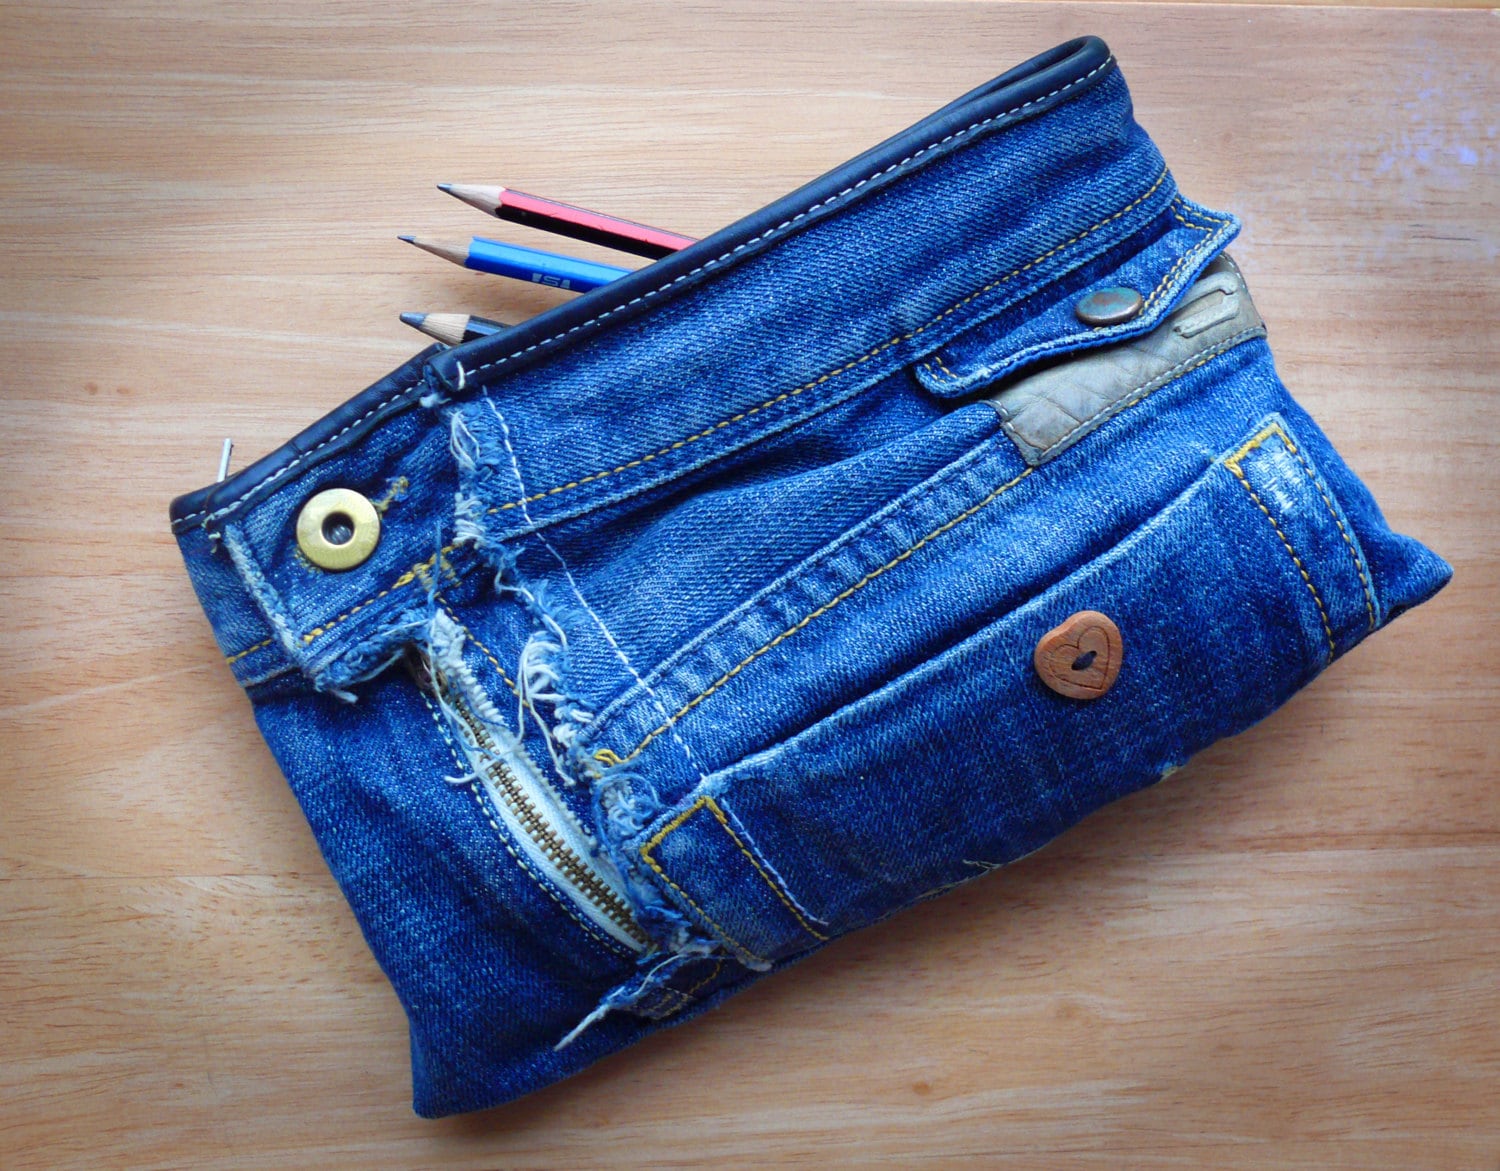 How To Make A Pencil Case From Recycled Materials ~ Pencil Case ...